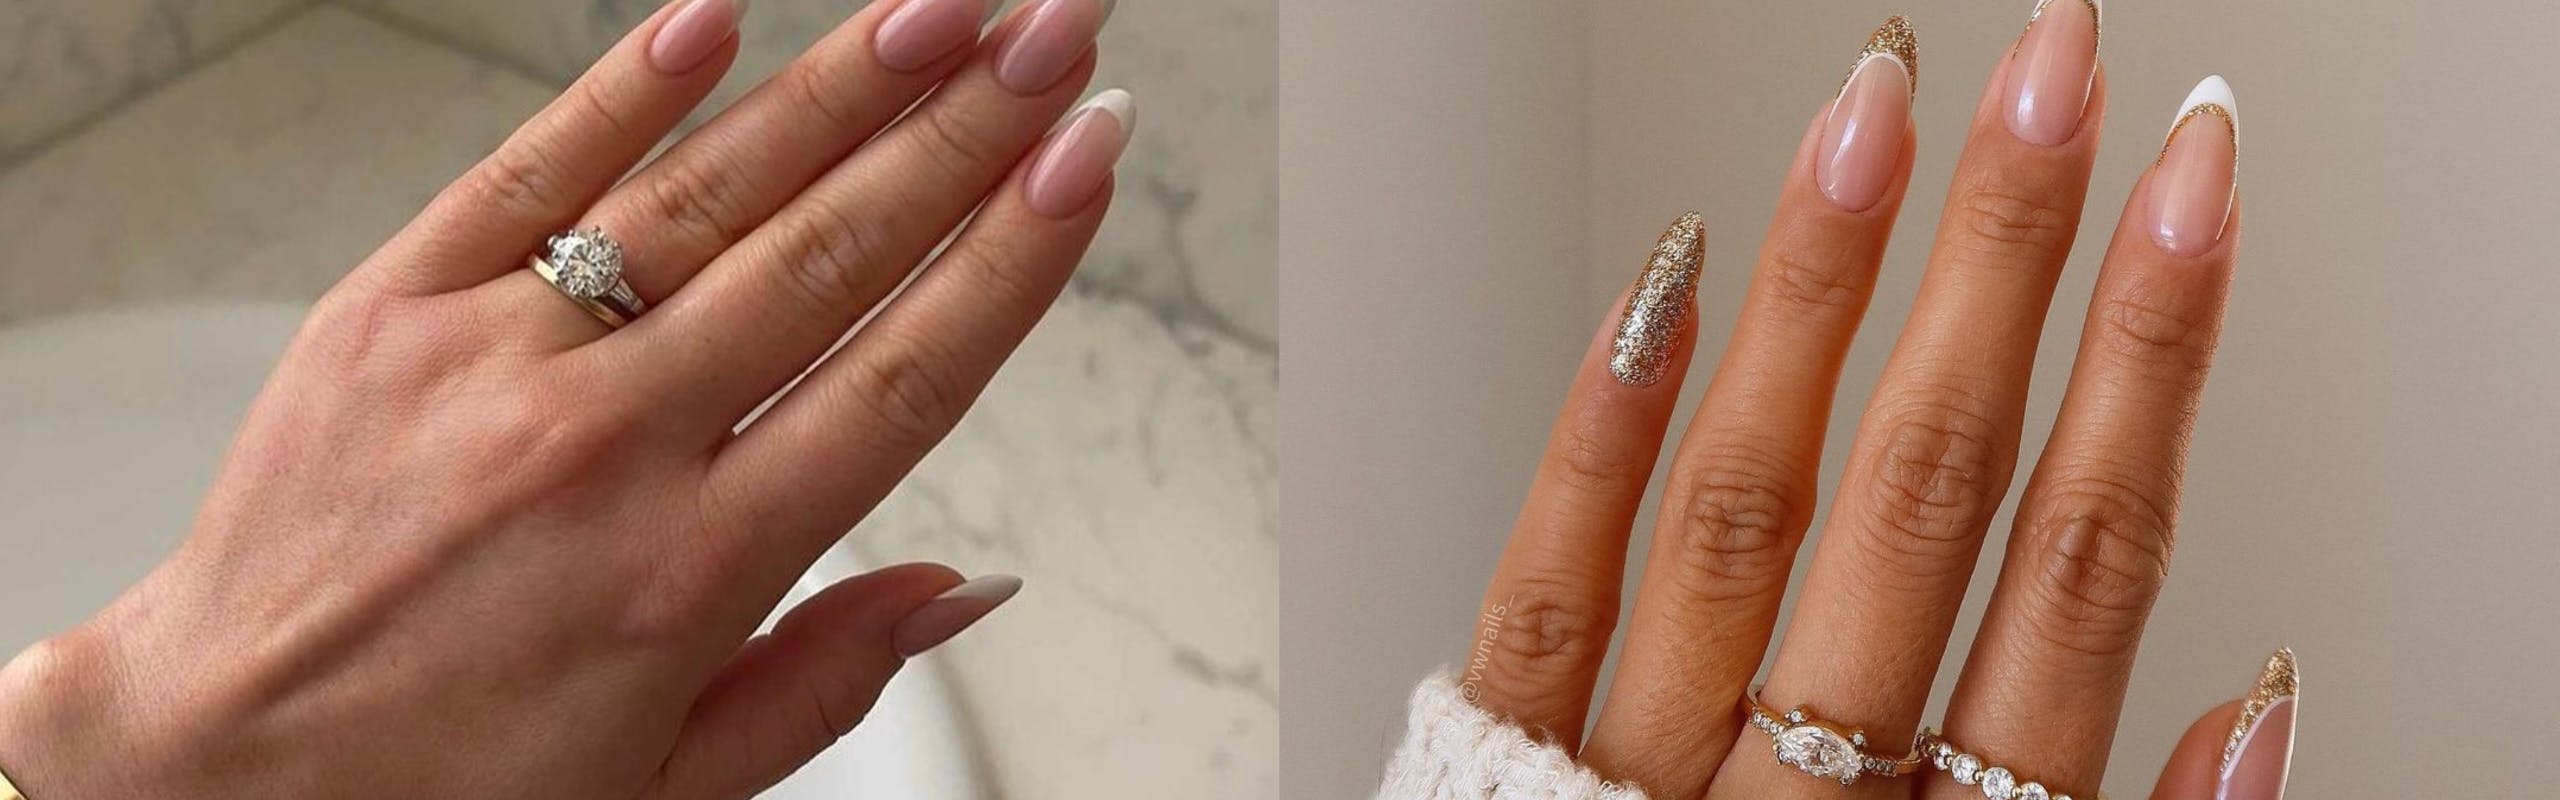 French manicure this season